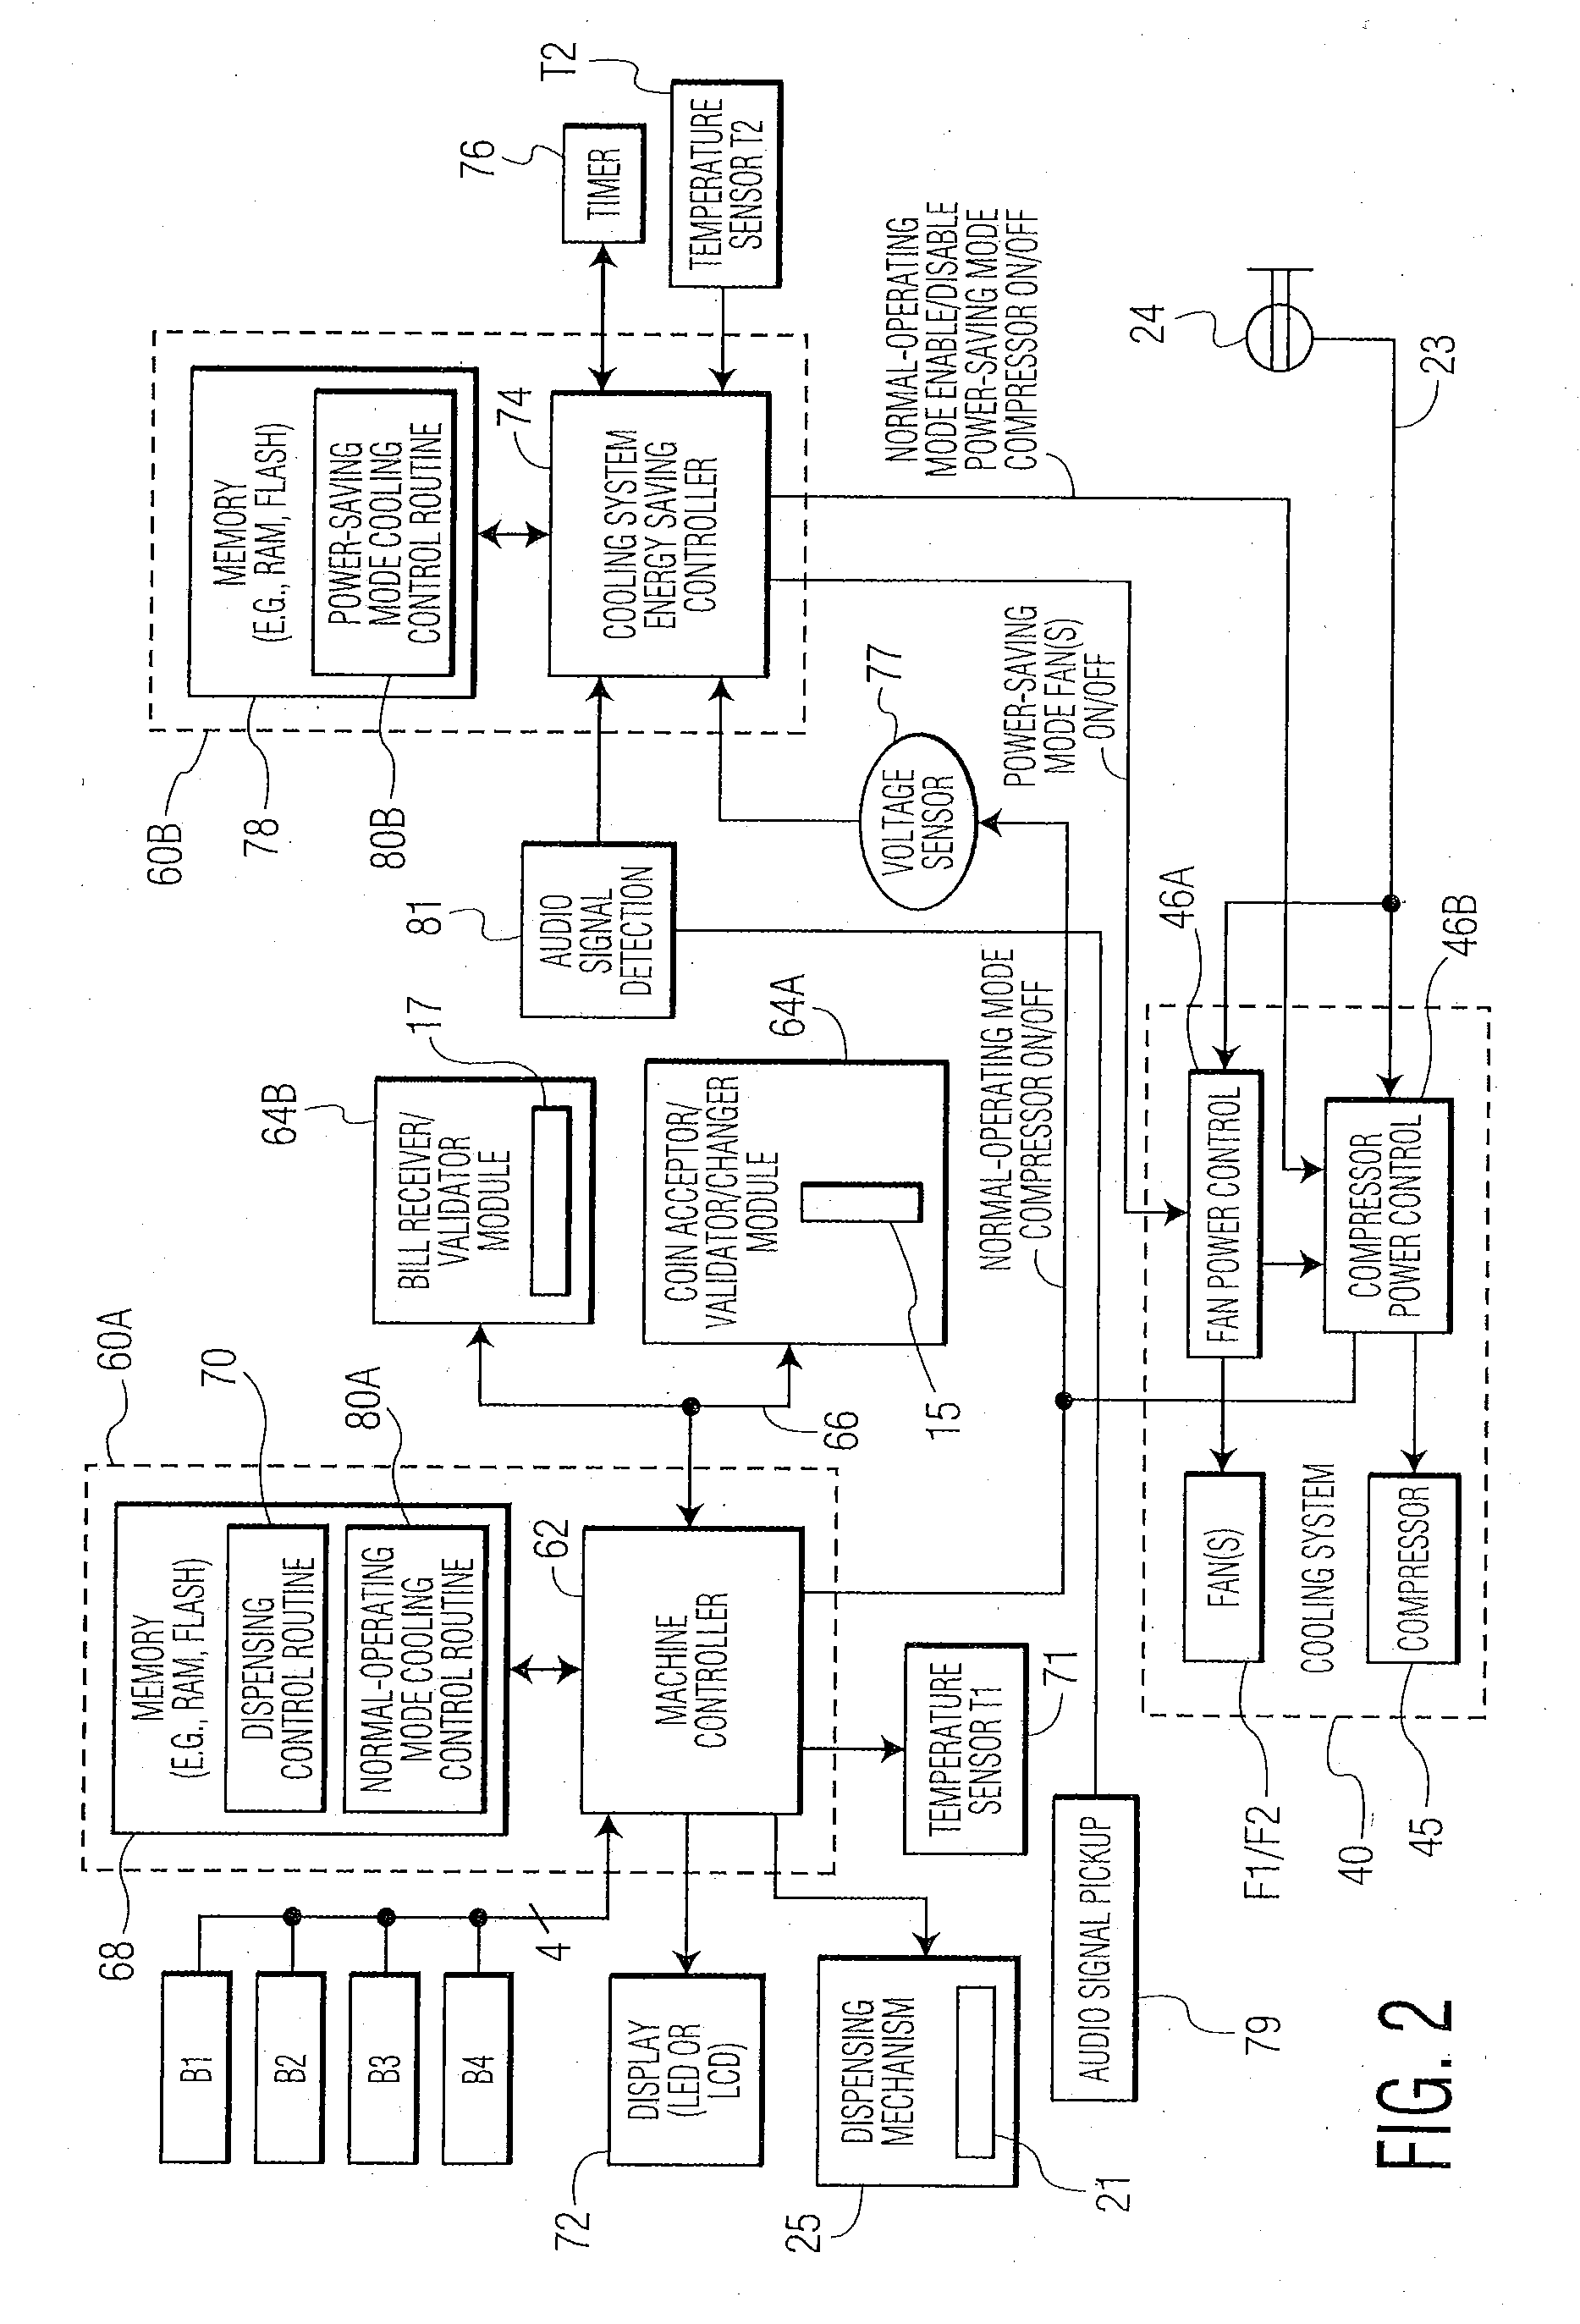 Method and apparatus for conserving power consumed by a vending machine utilizing audio signal detection